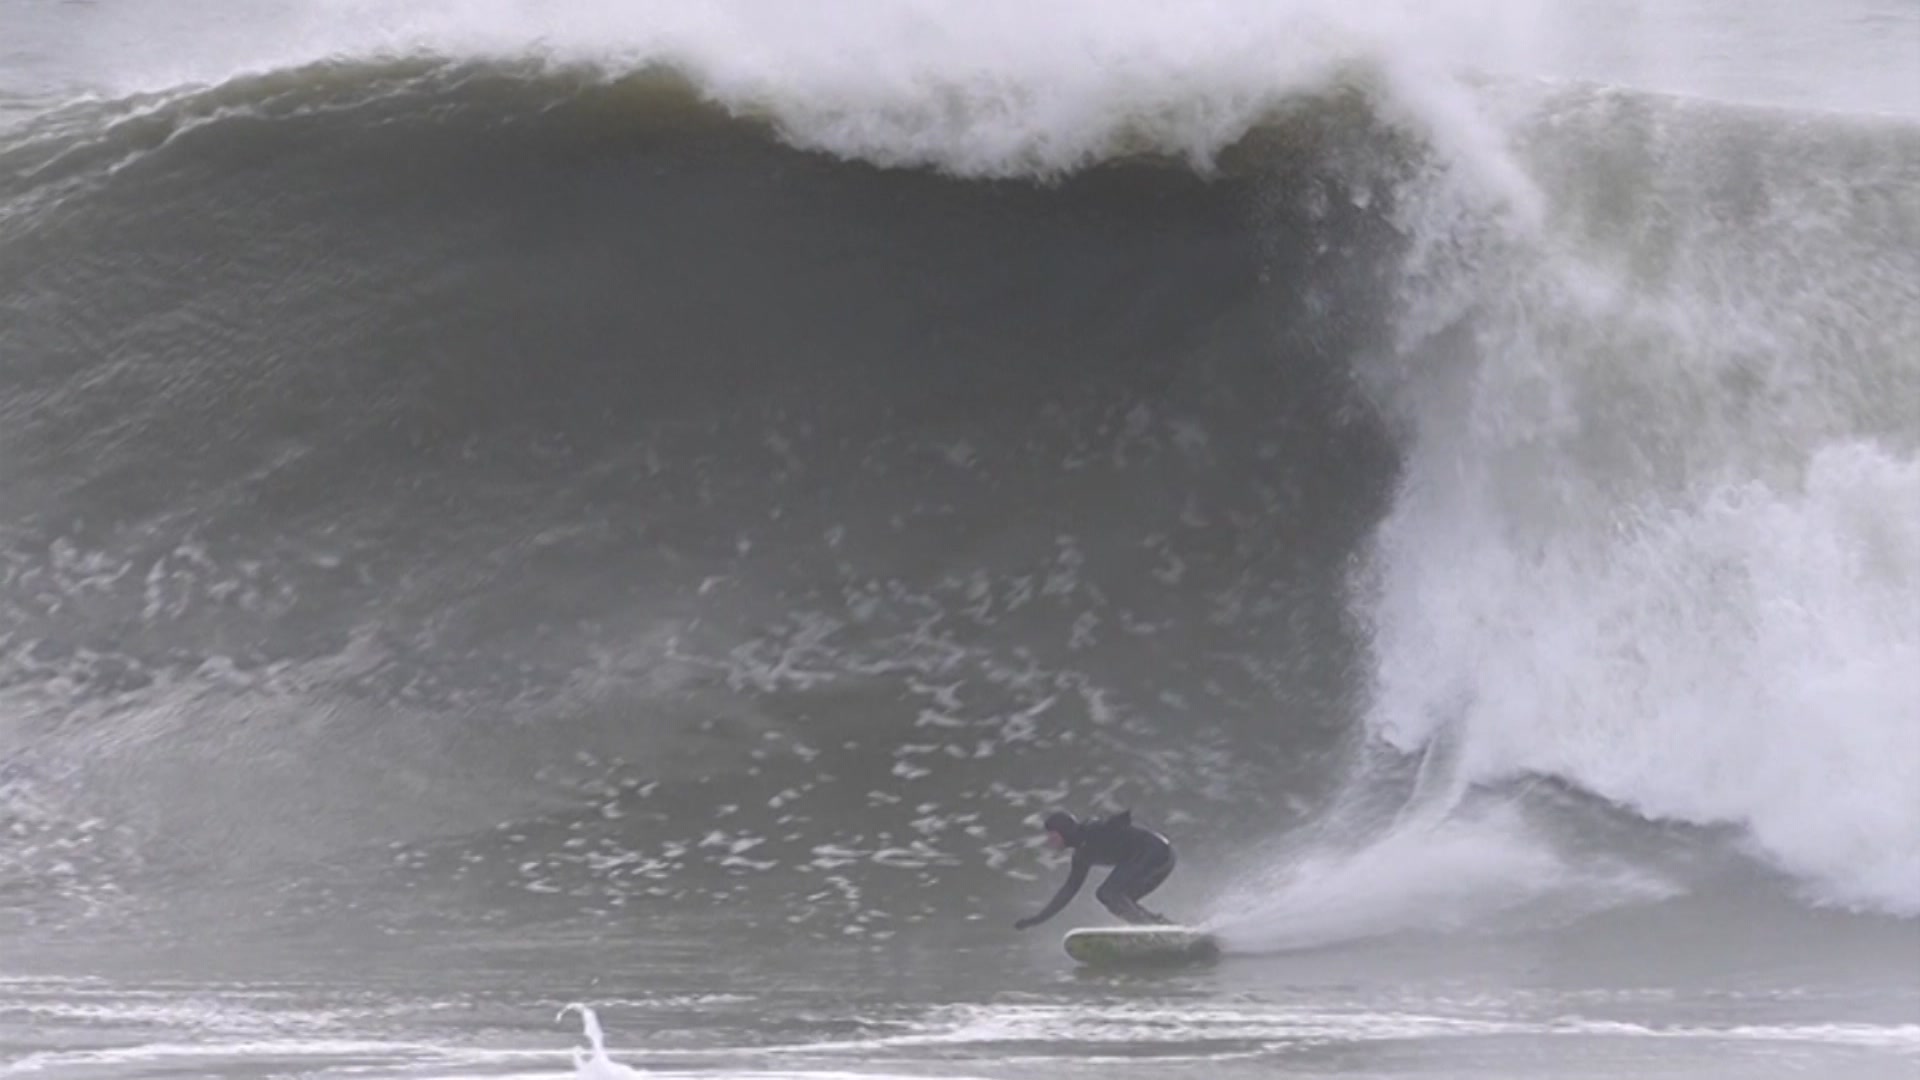 Biggest Swell of the Year in New Jersey! - The Surfers View